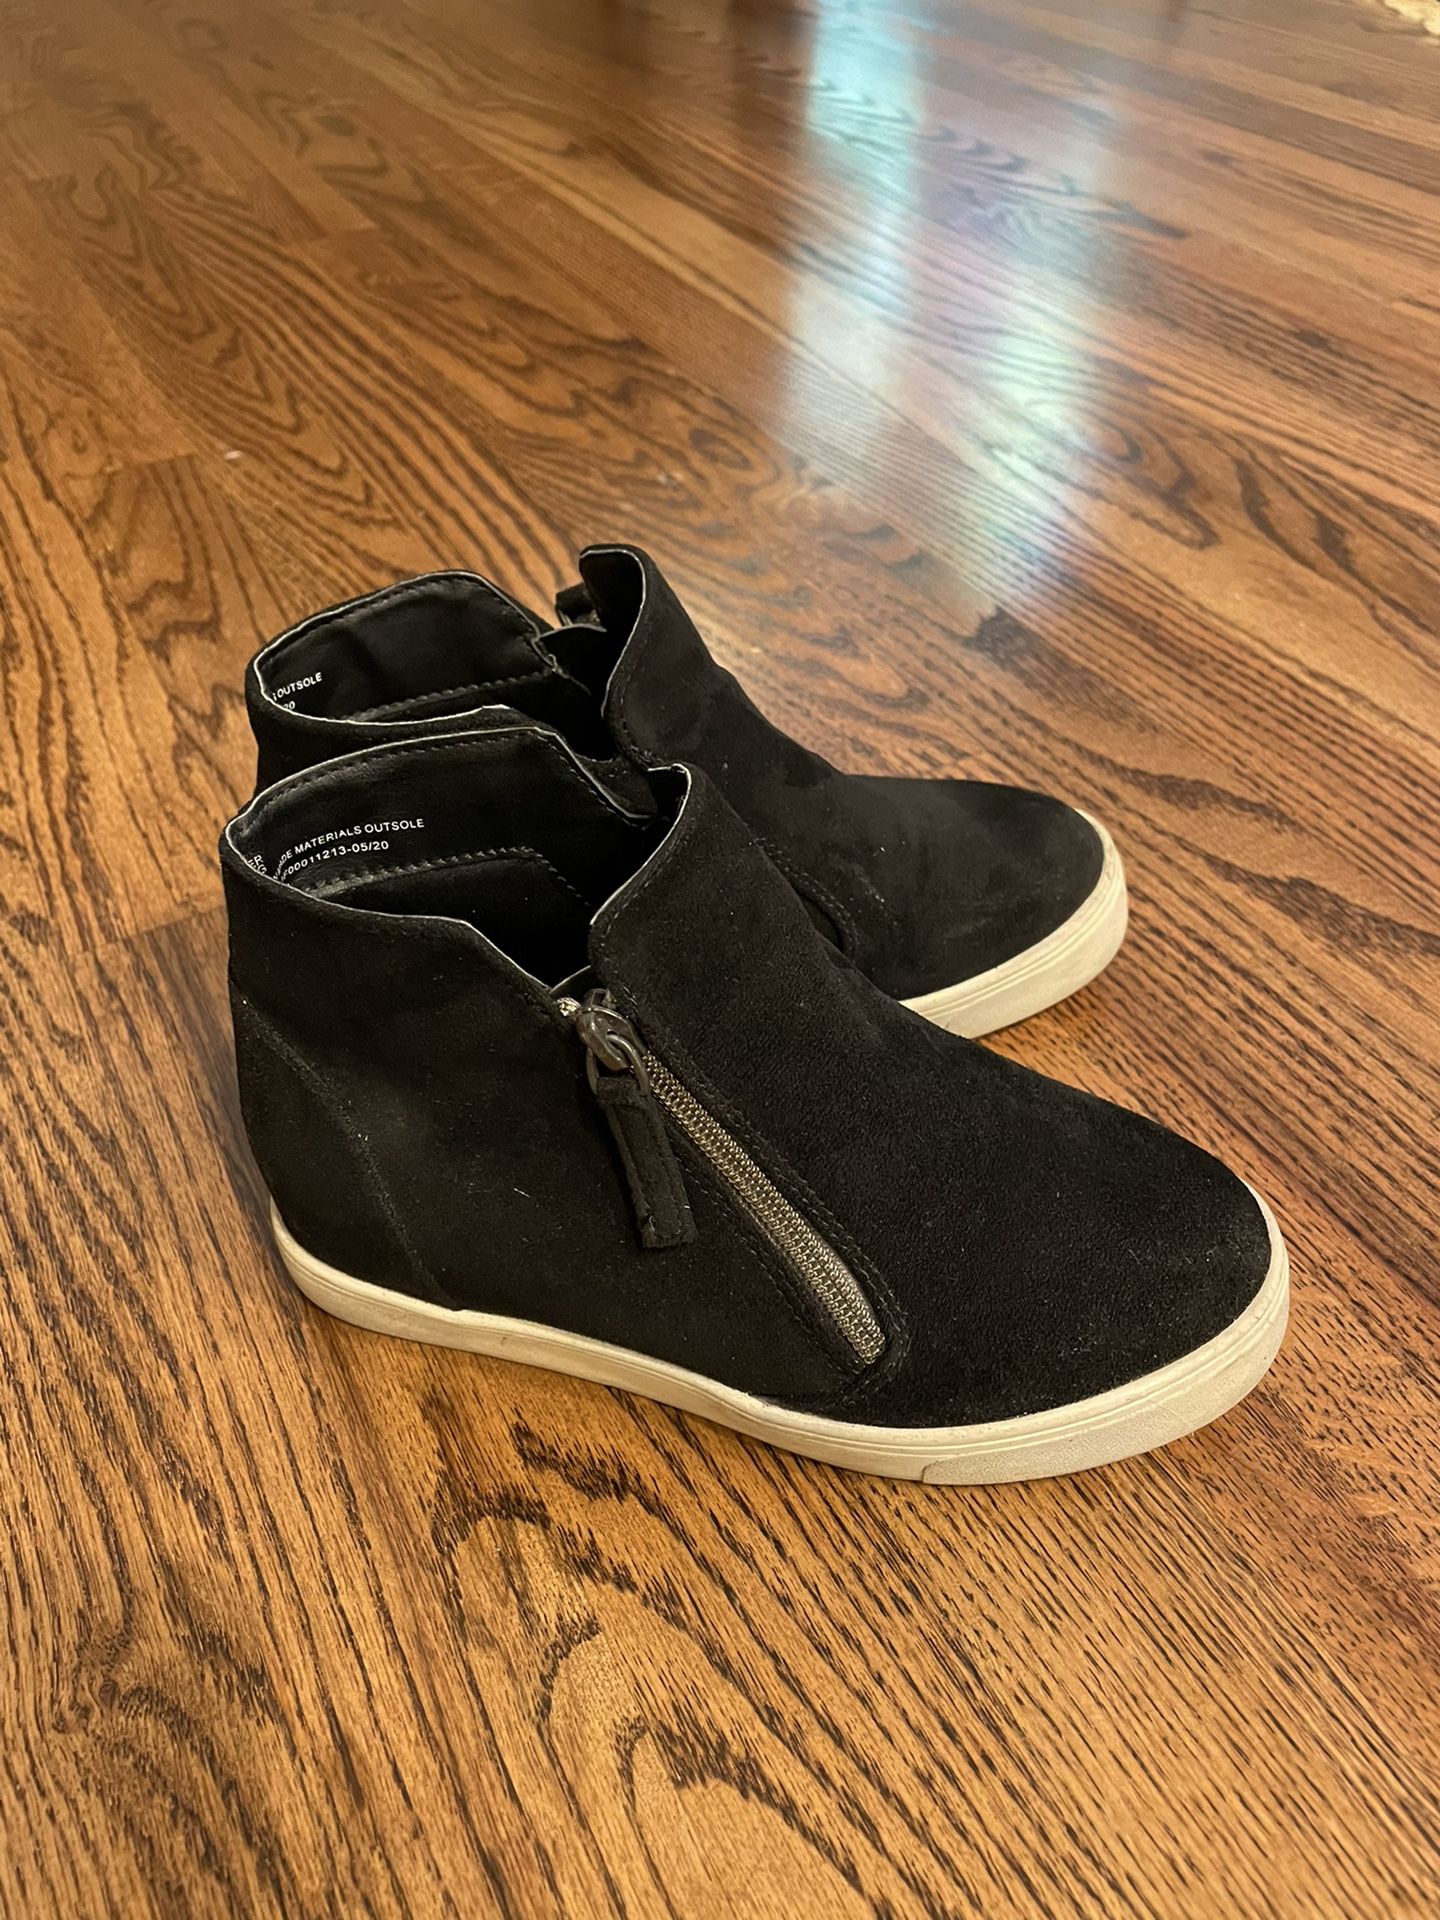 Girls Black “suede” Wedge Boots/ Zip Up Shoes